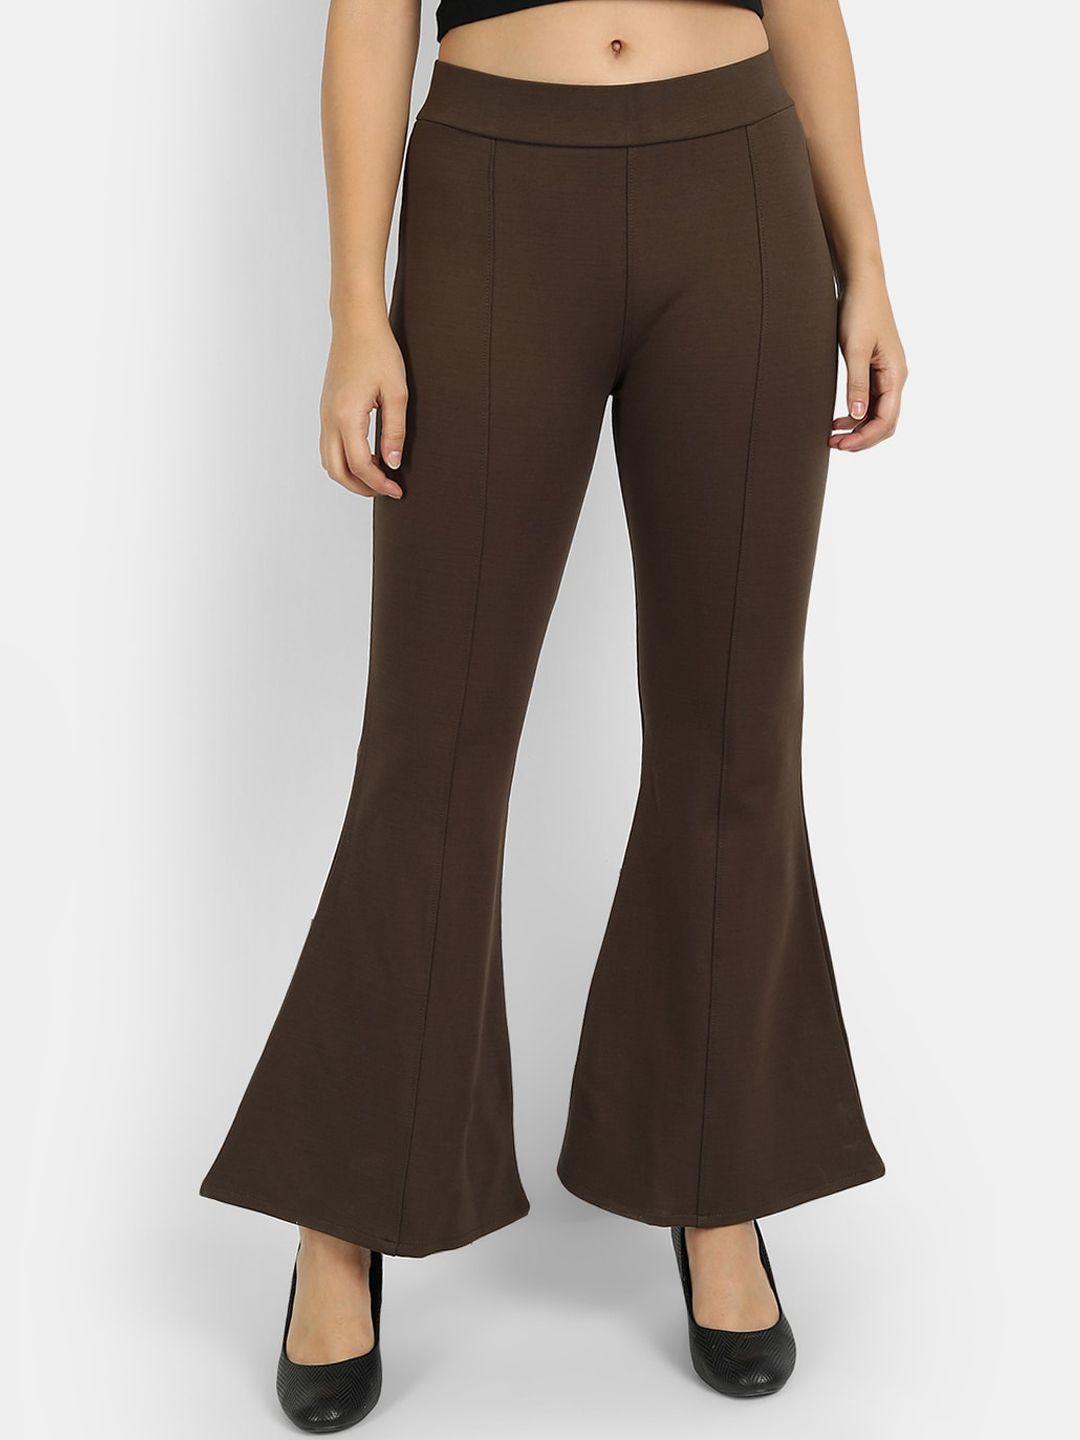 Next One Women Olive Green Flared High-Rise Trousers